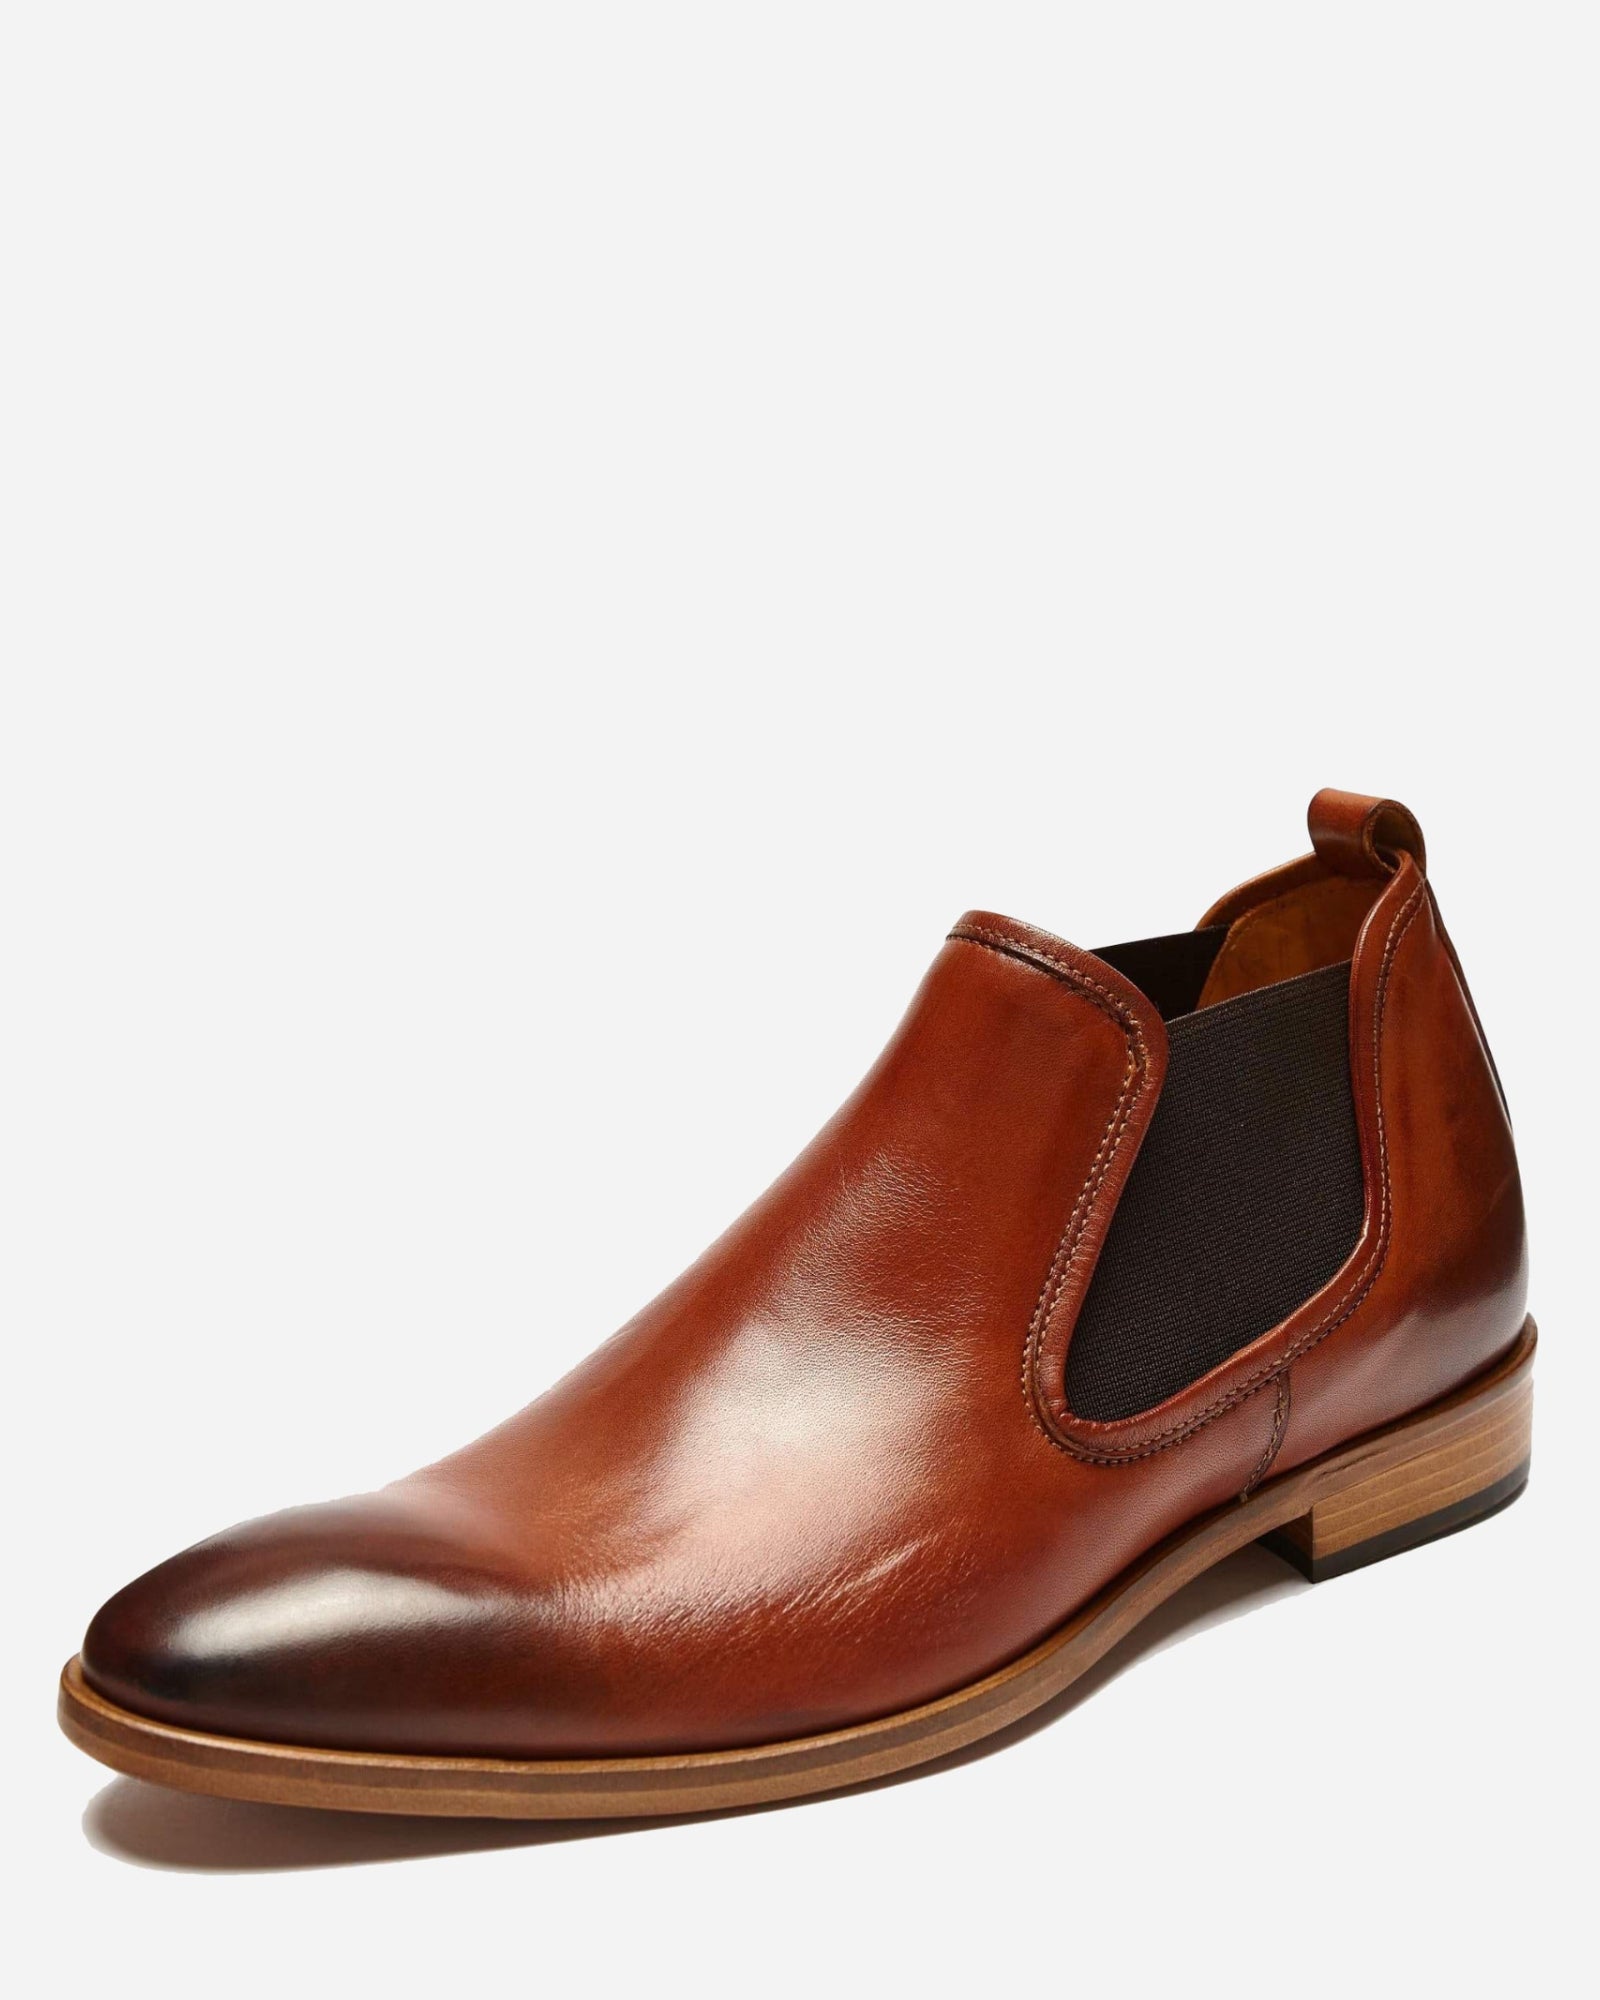 Cotto Chelsea Boot - Men's Chelsea Boots at Menzclub